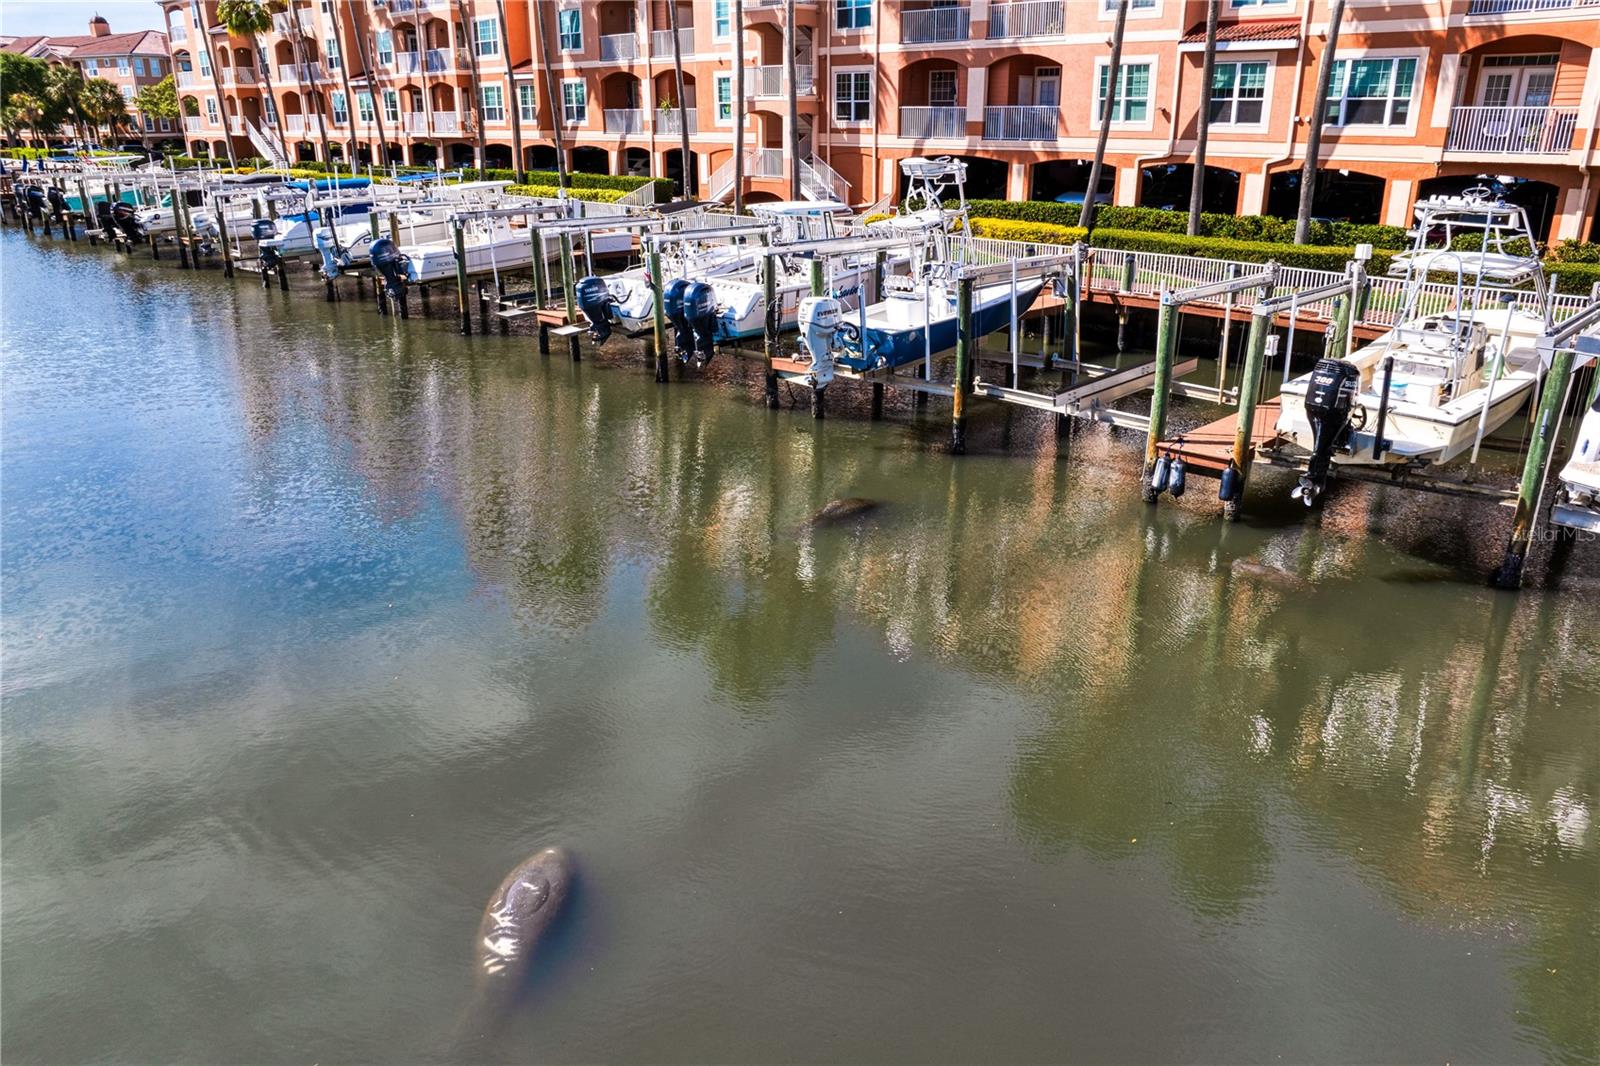 Manatees are frequent visitors